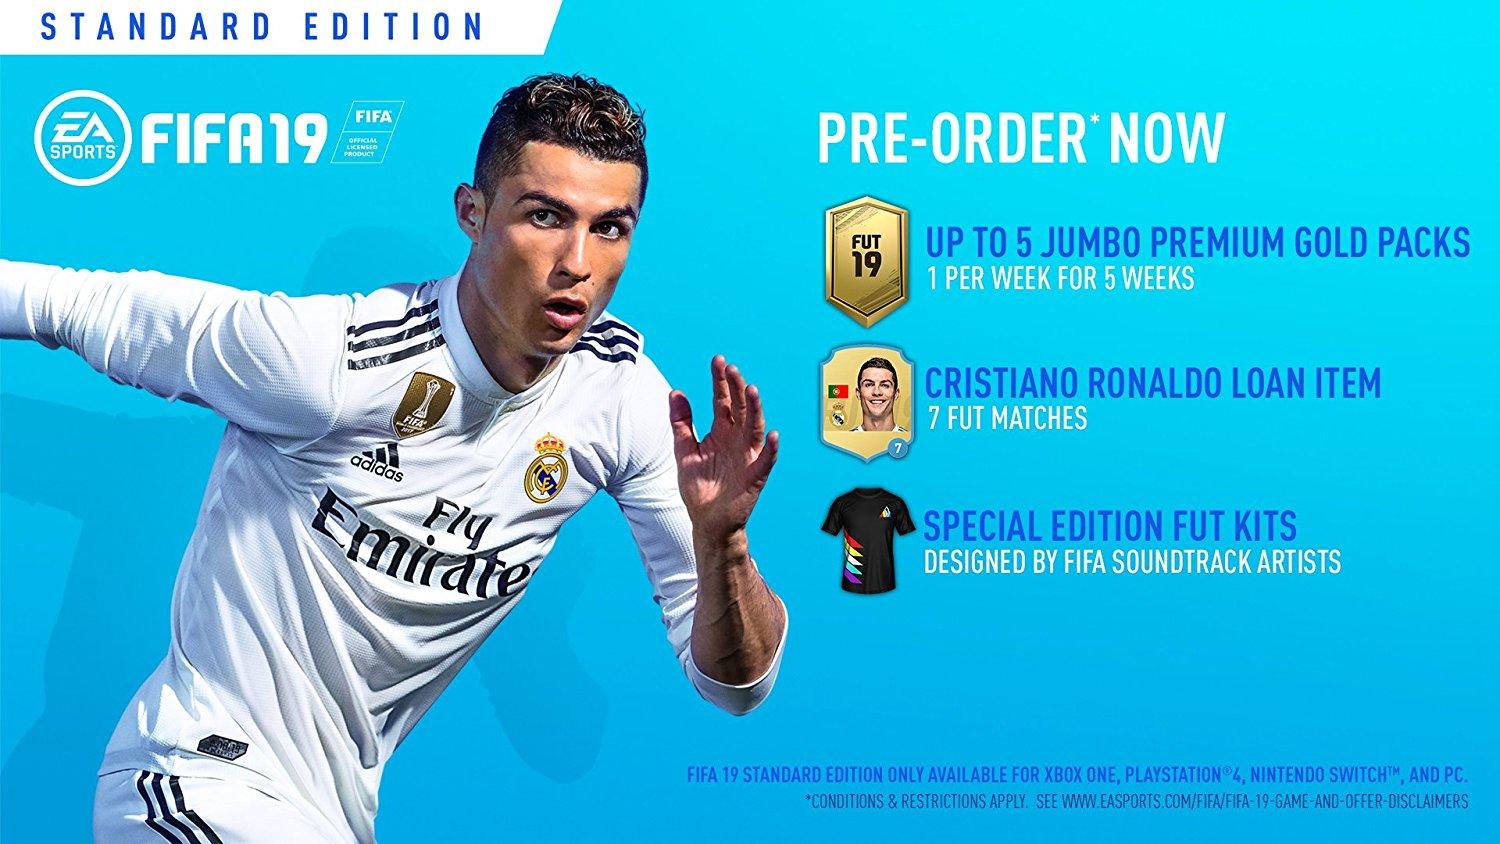 NEW RELEASE!!! PS4 FIFA 19